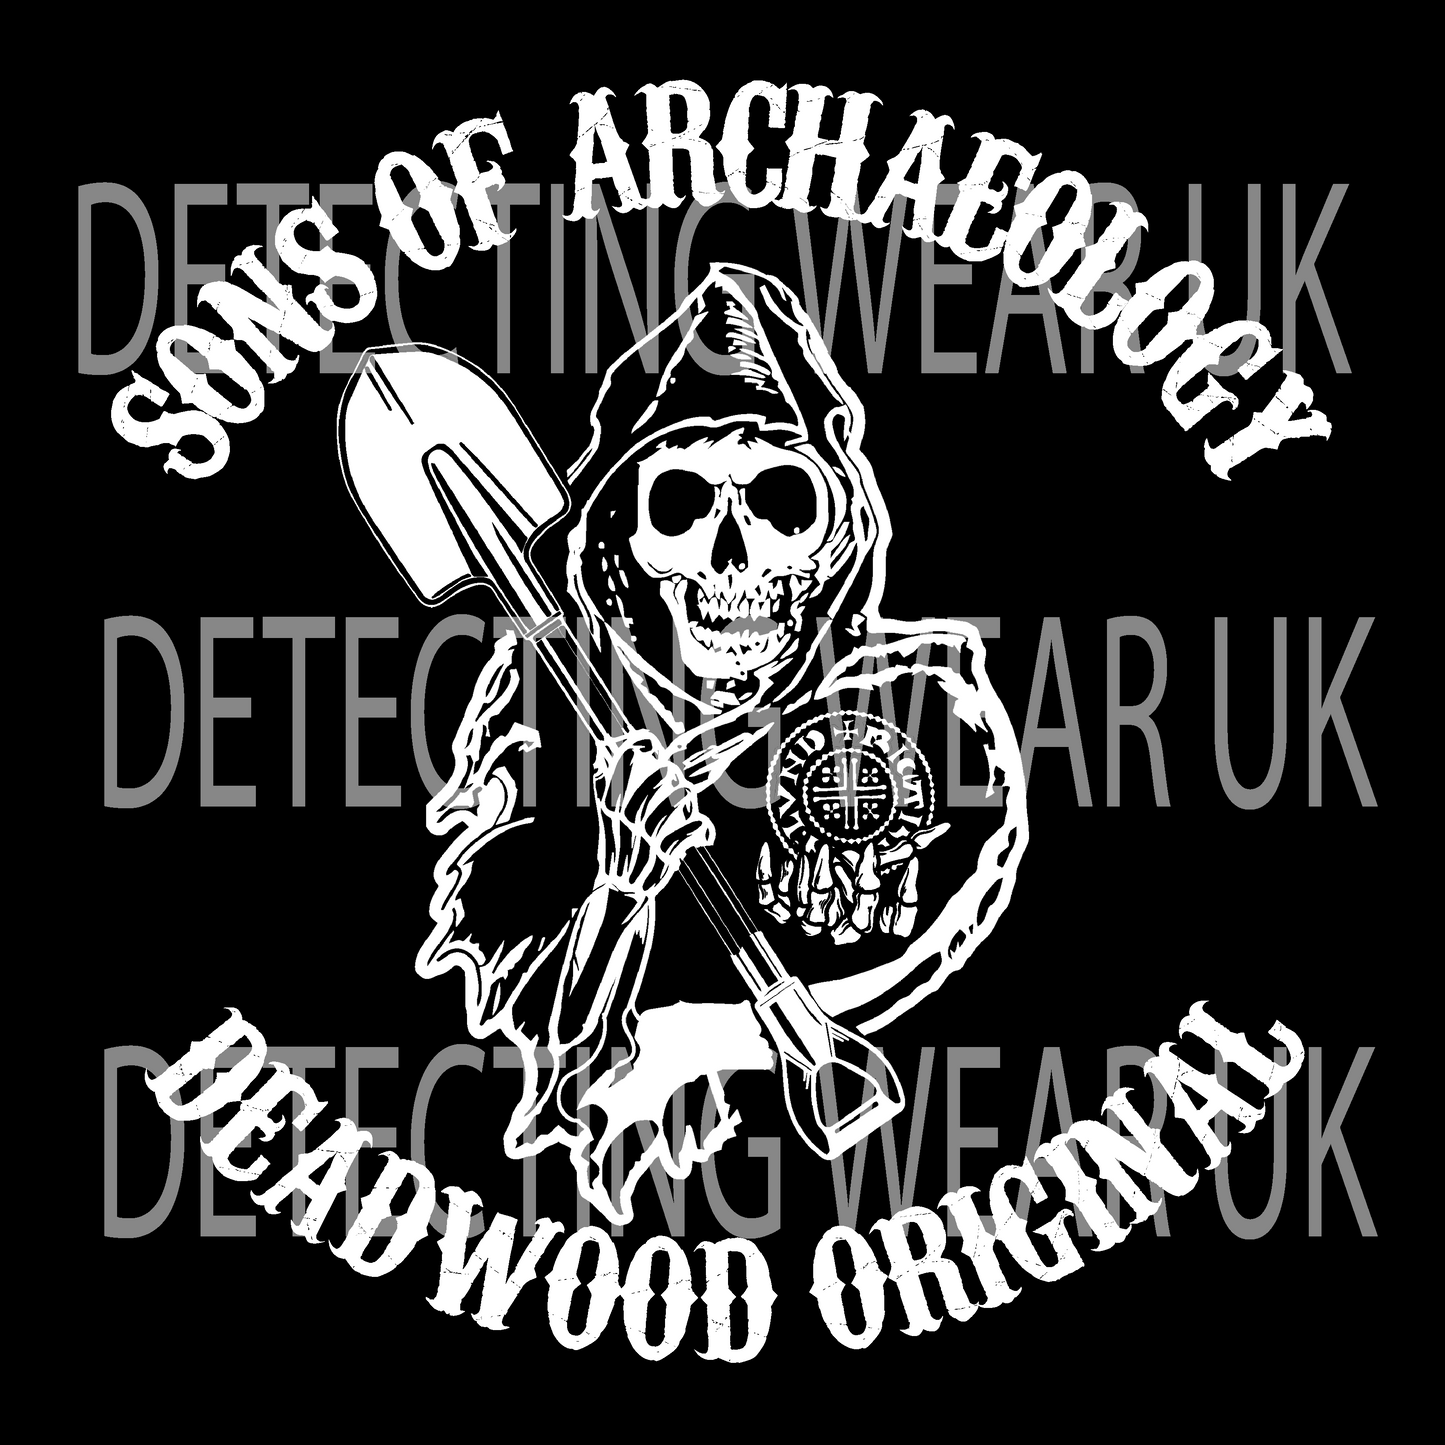 Sons of Archaeology Hoodie